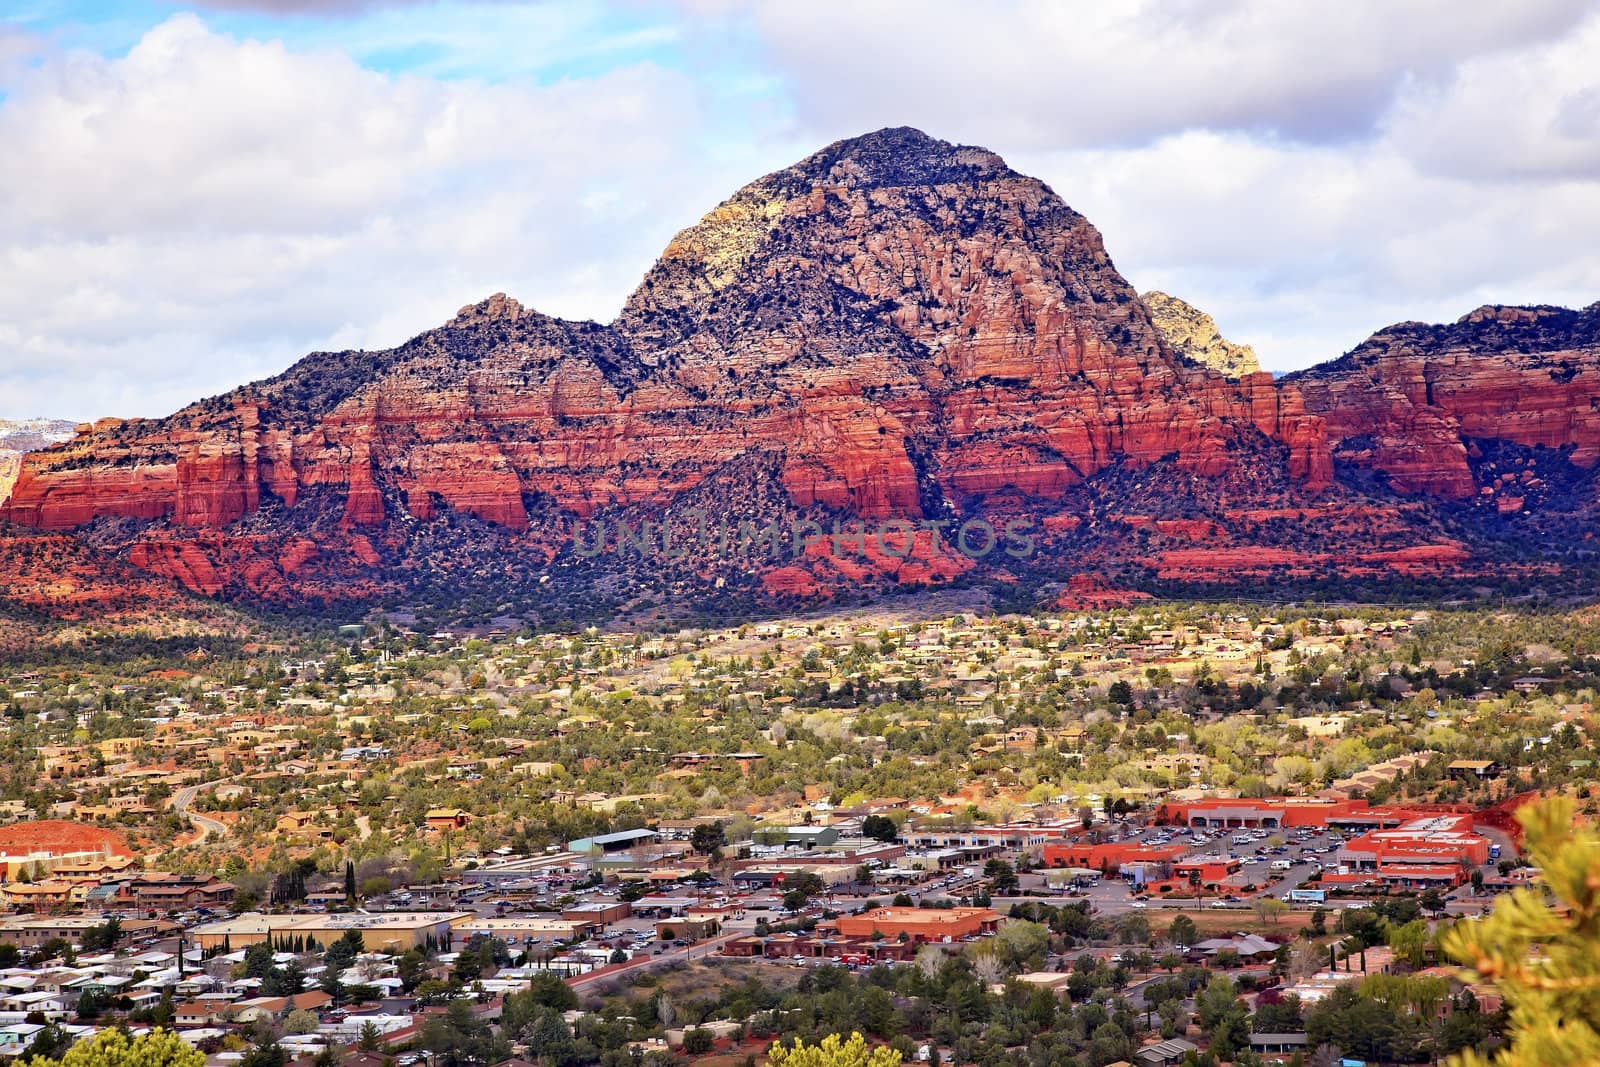 Capitol Butte Orange Red Rock Canyon Houses, Shopping Malls, Blue Cloudy Sky Green Trees Snow West Sedona Arizona